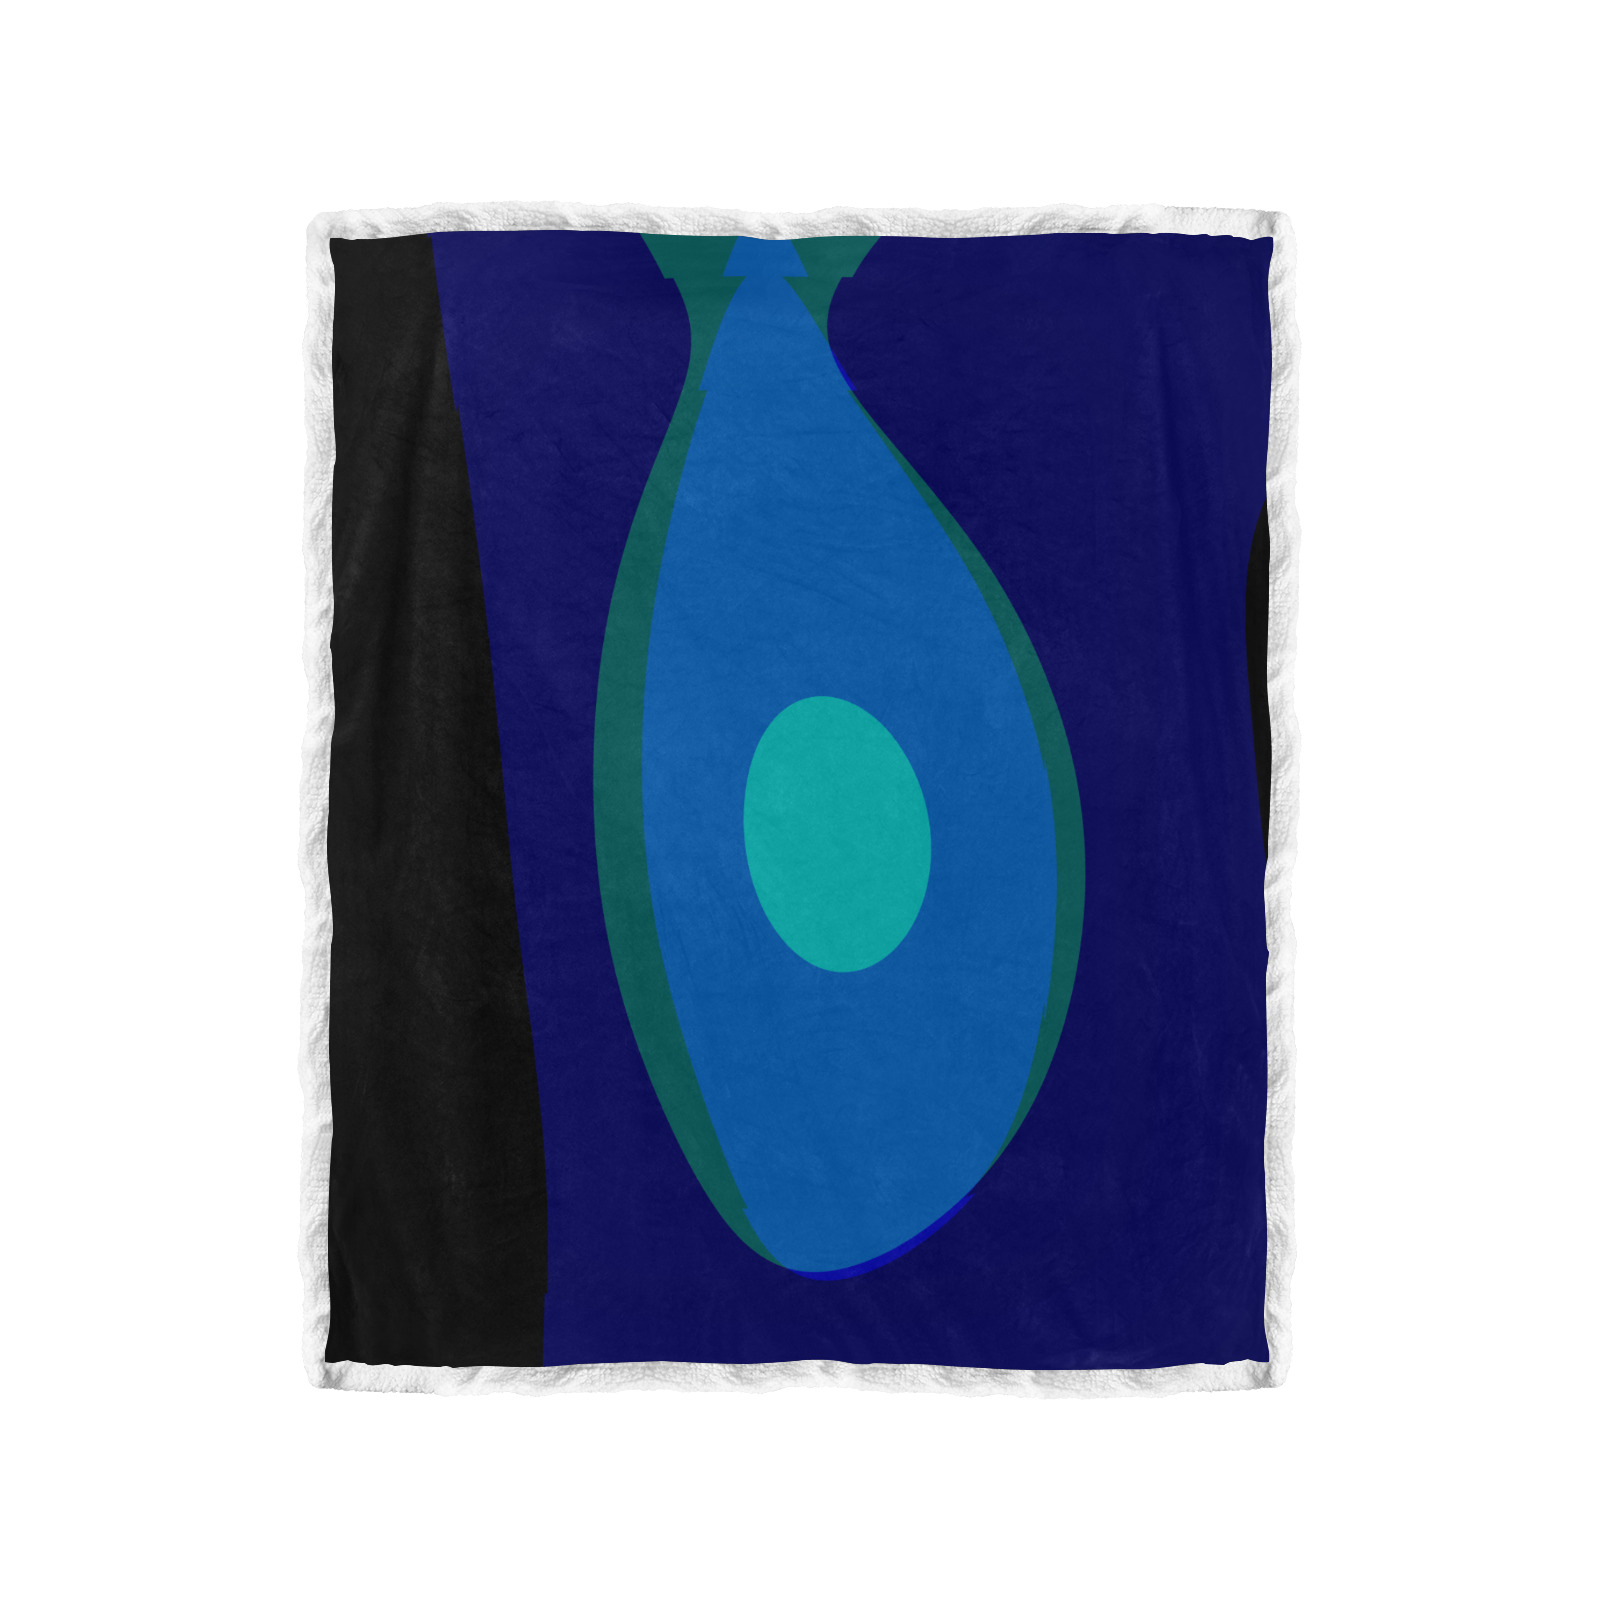 Dimensional Blue Abstract 915 Double Layer Short Plush Blanket 50"x60"